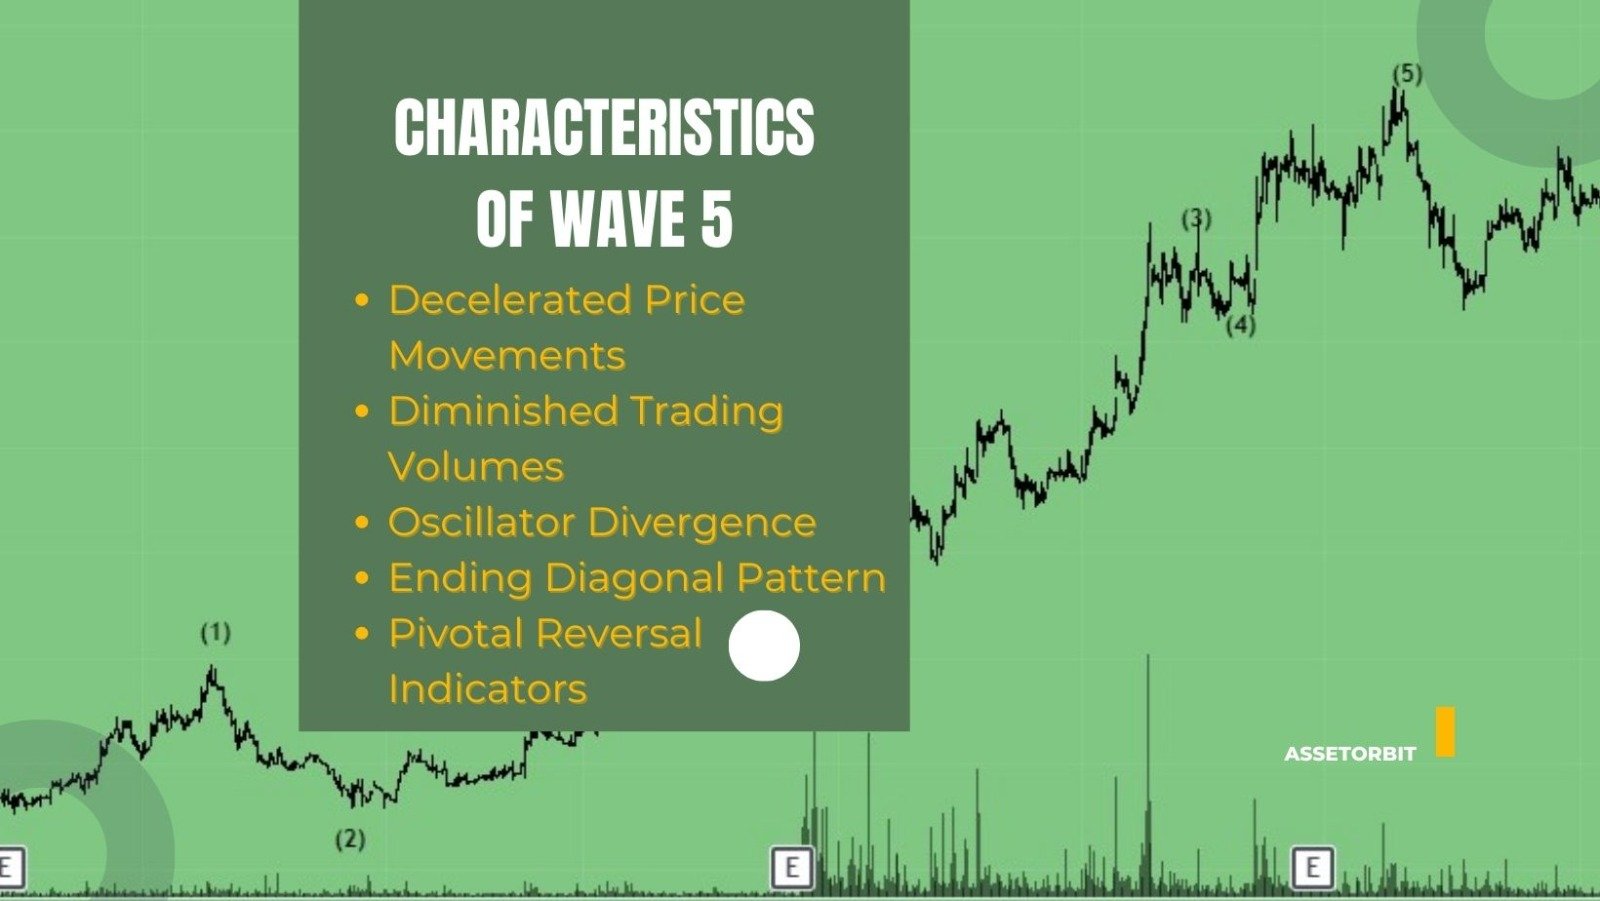 What are the Characteristics of Wave 5?